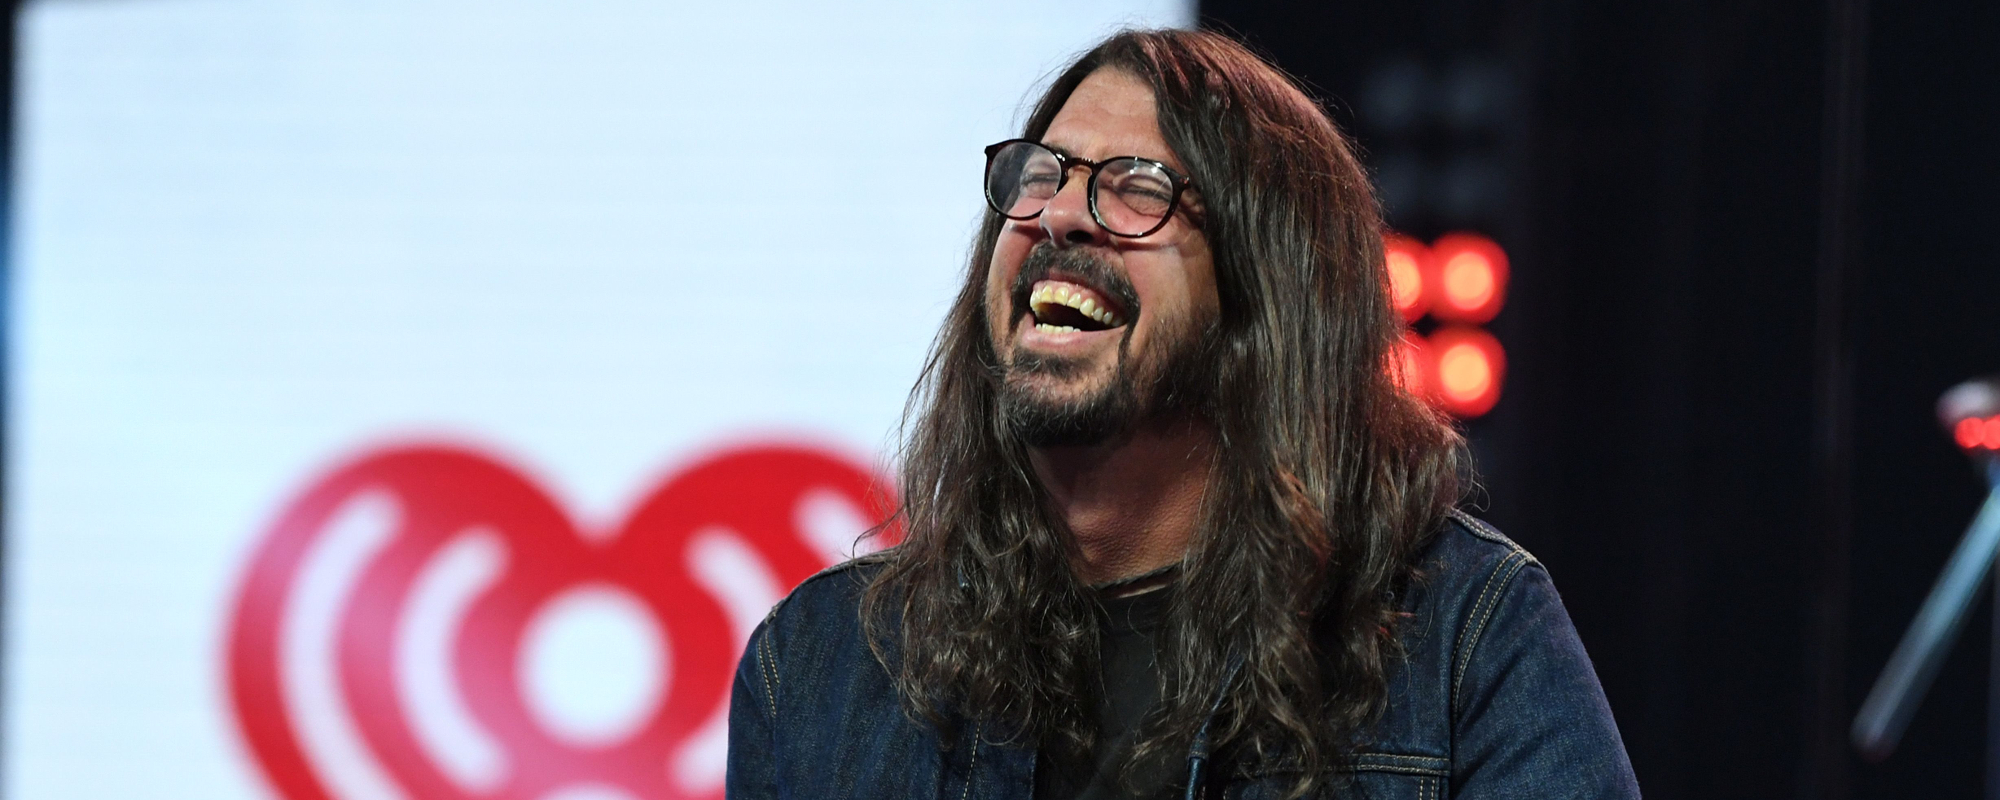 Dave Grohl & His Mother Hit The Road With Upcoming ‘From Cradle to Stage’ TV Series